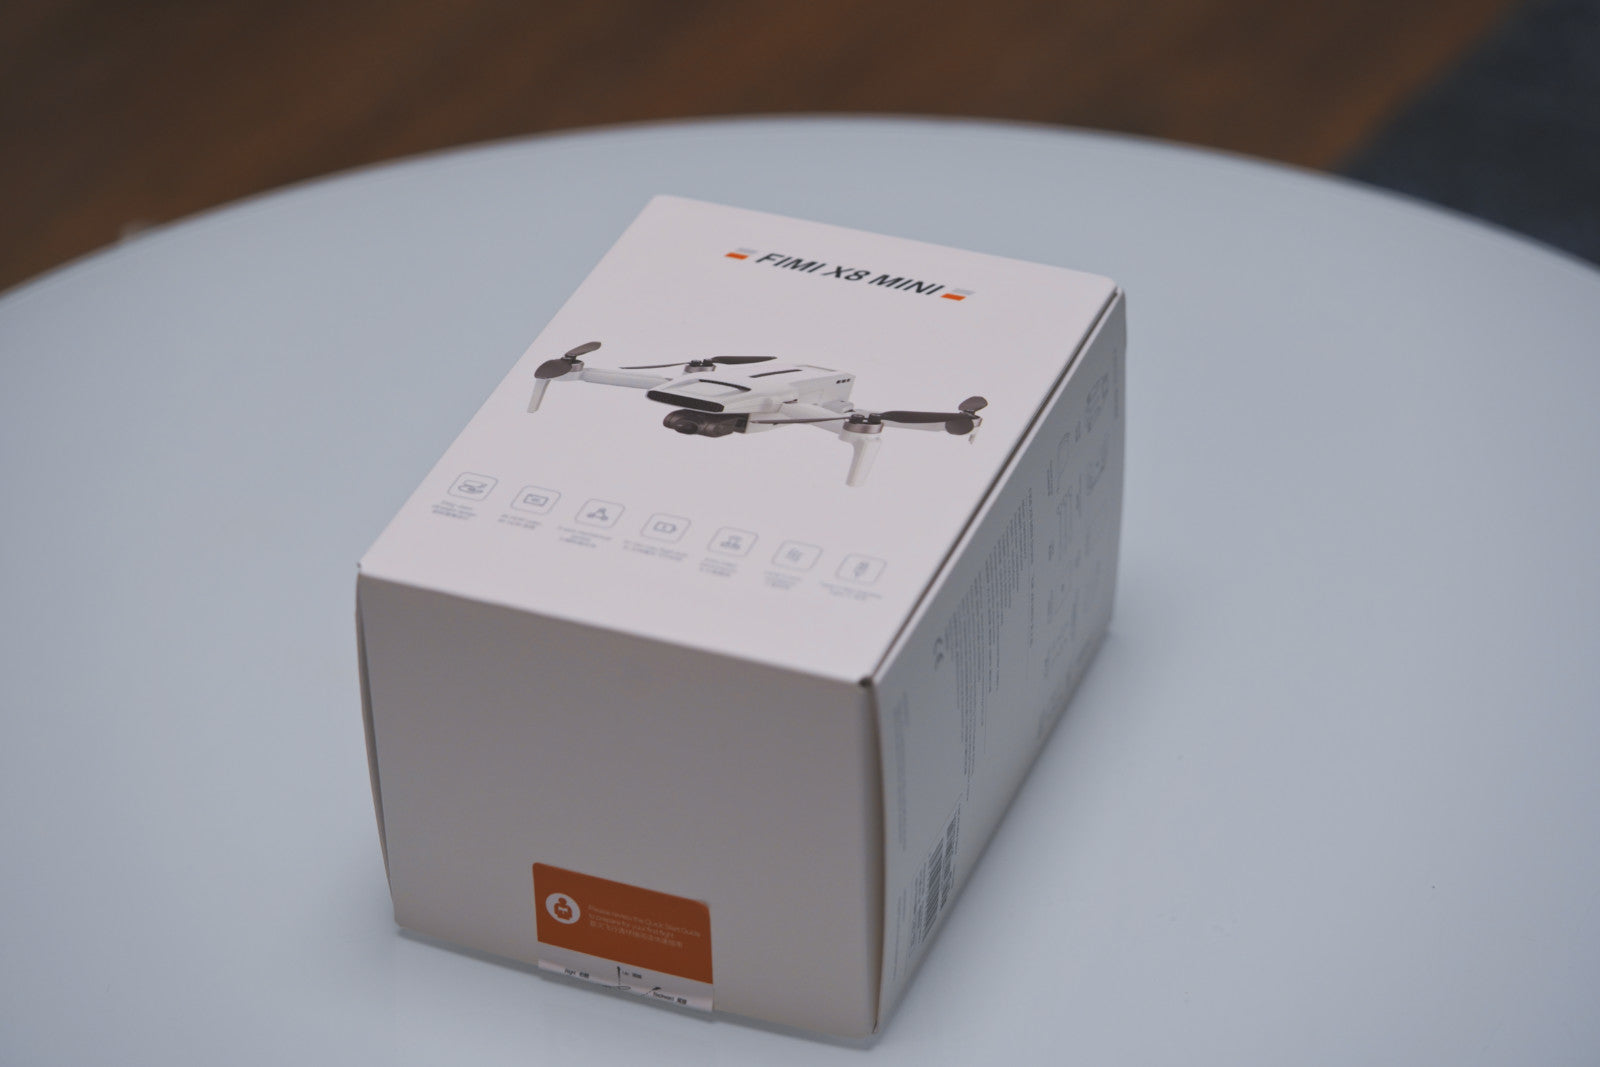 Fimi X8 Mini review An entry-level rival to DJI’s camera drones